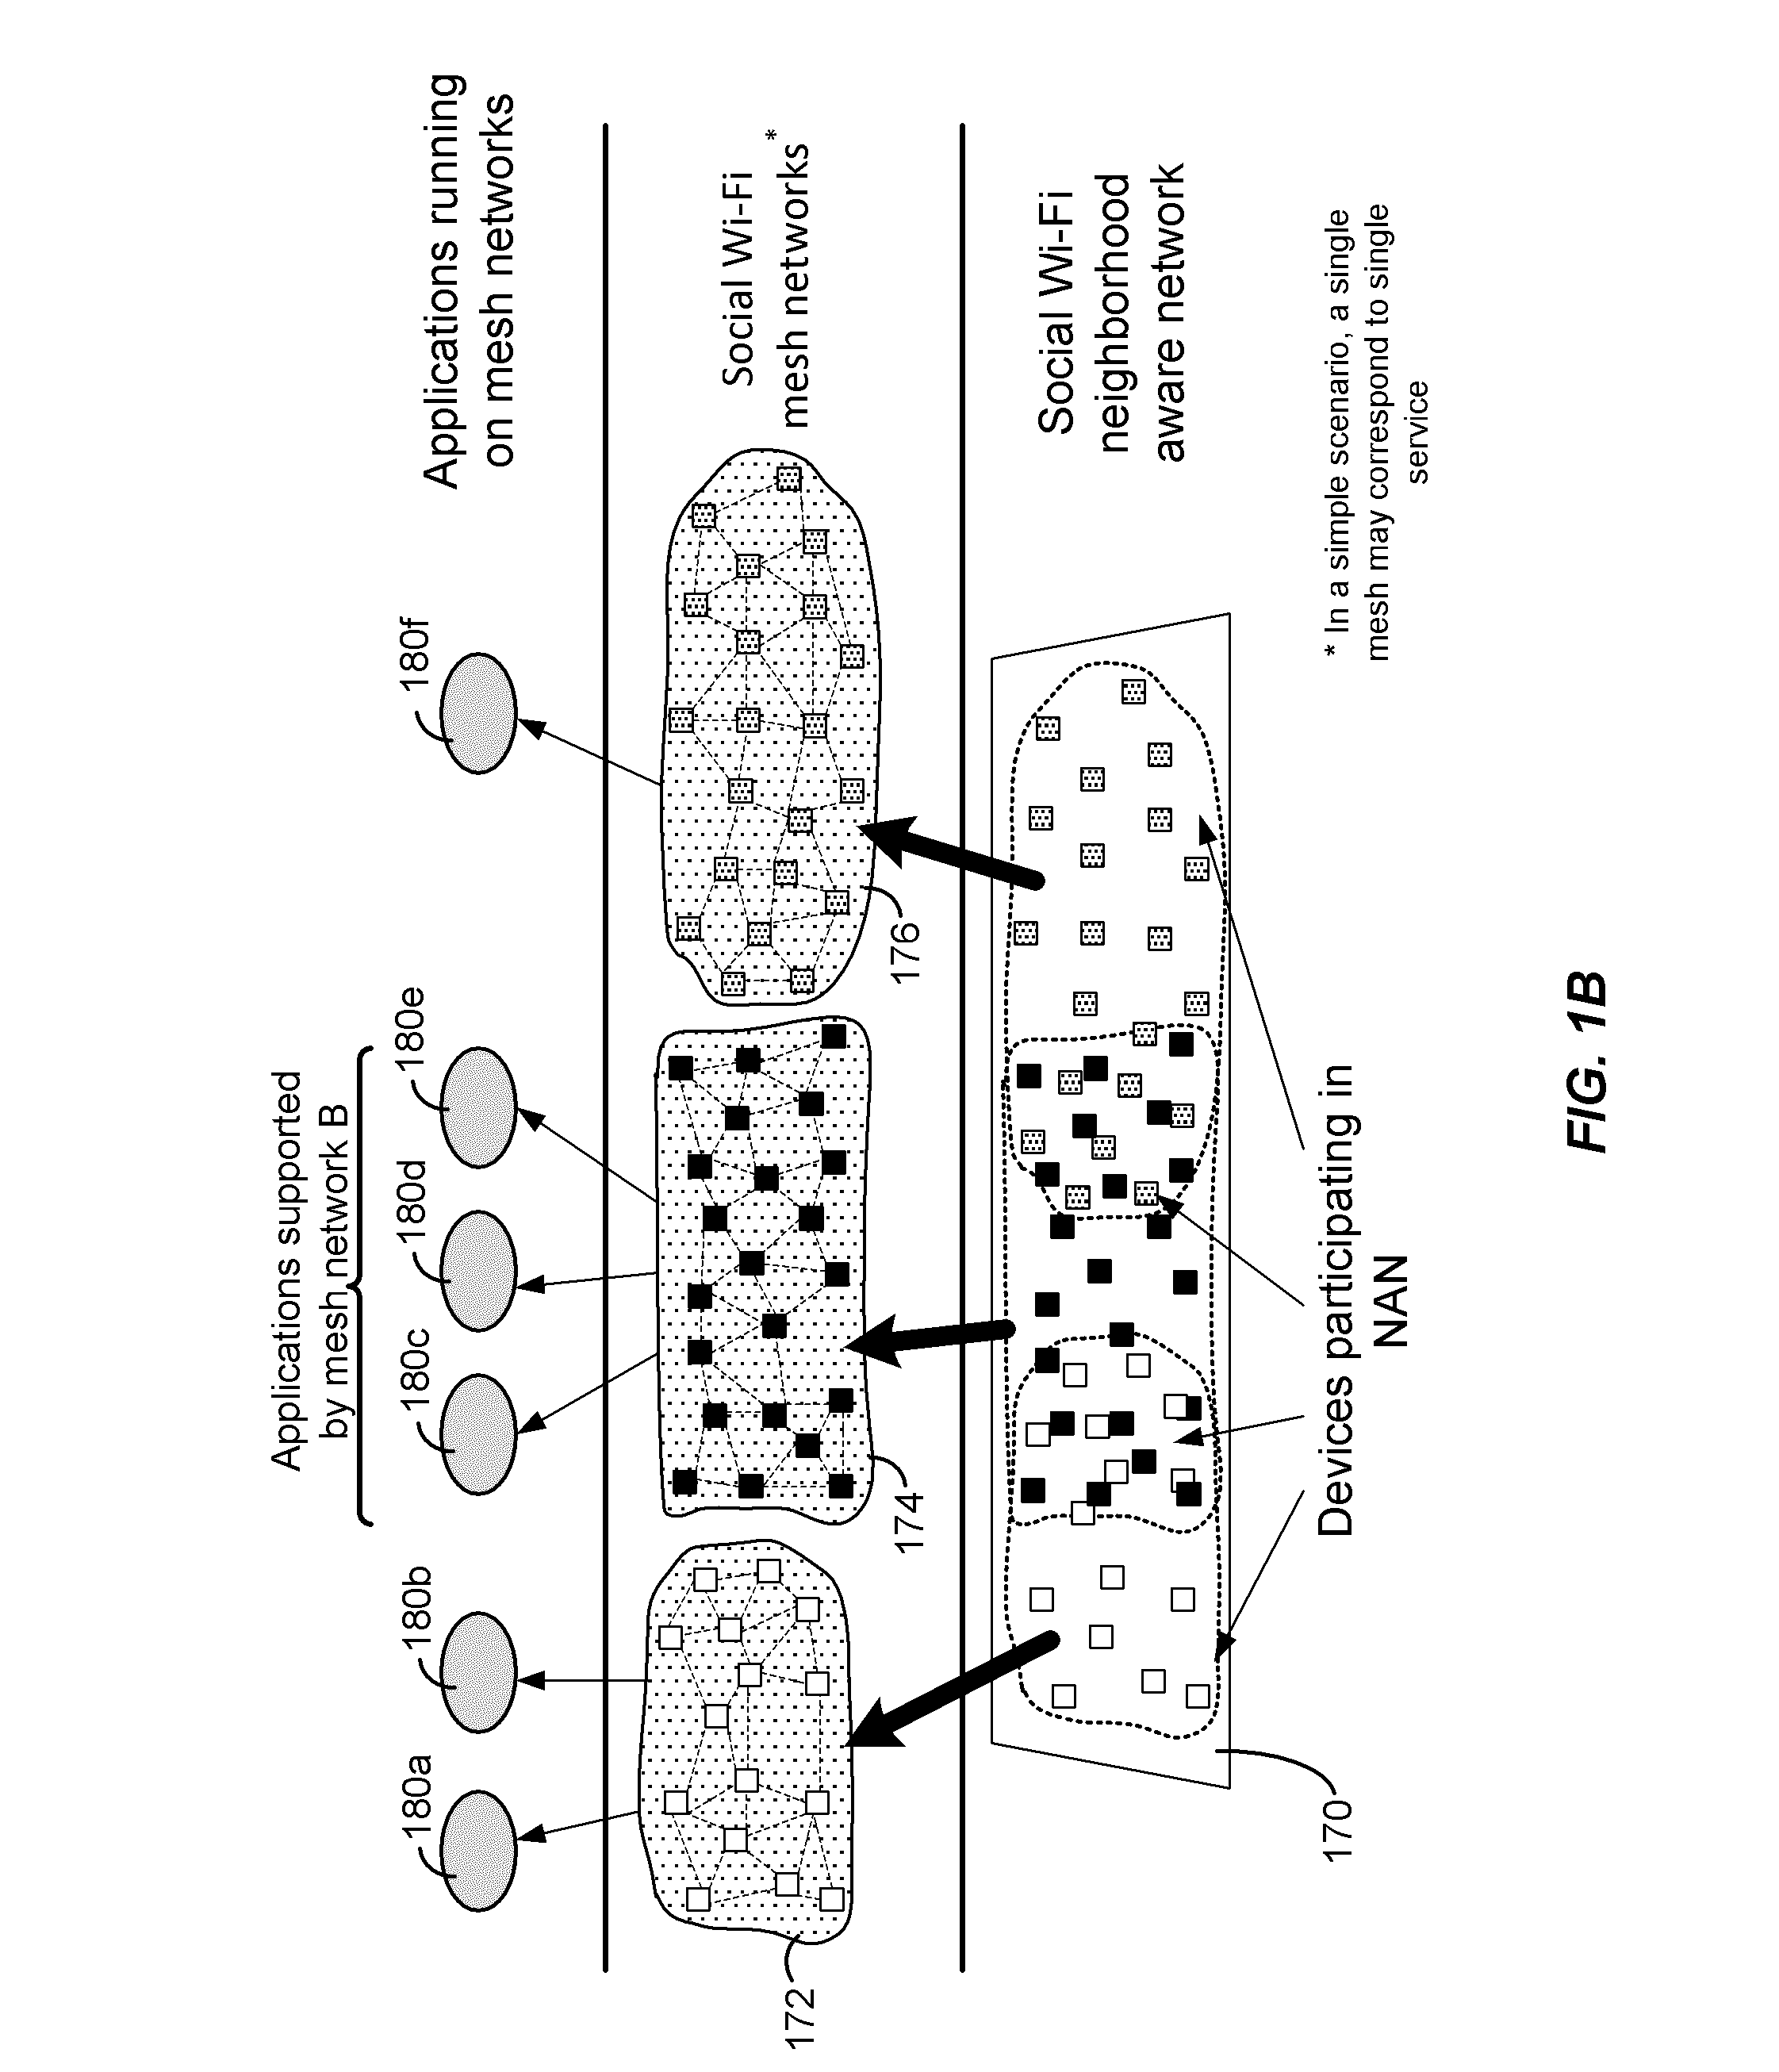 System and method for multihop service discovery with member station proxy service advertisements